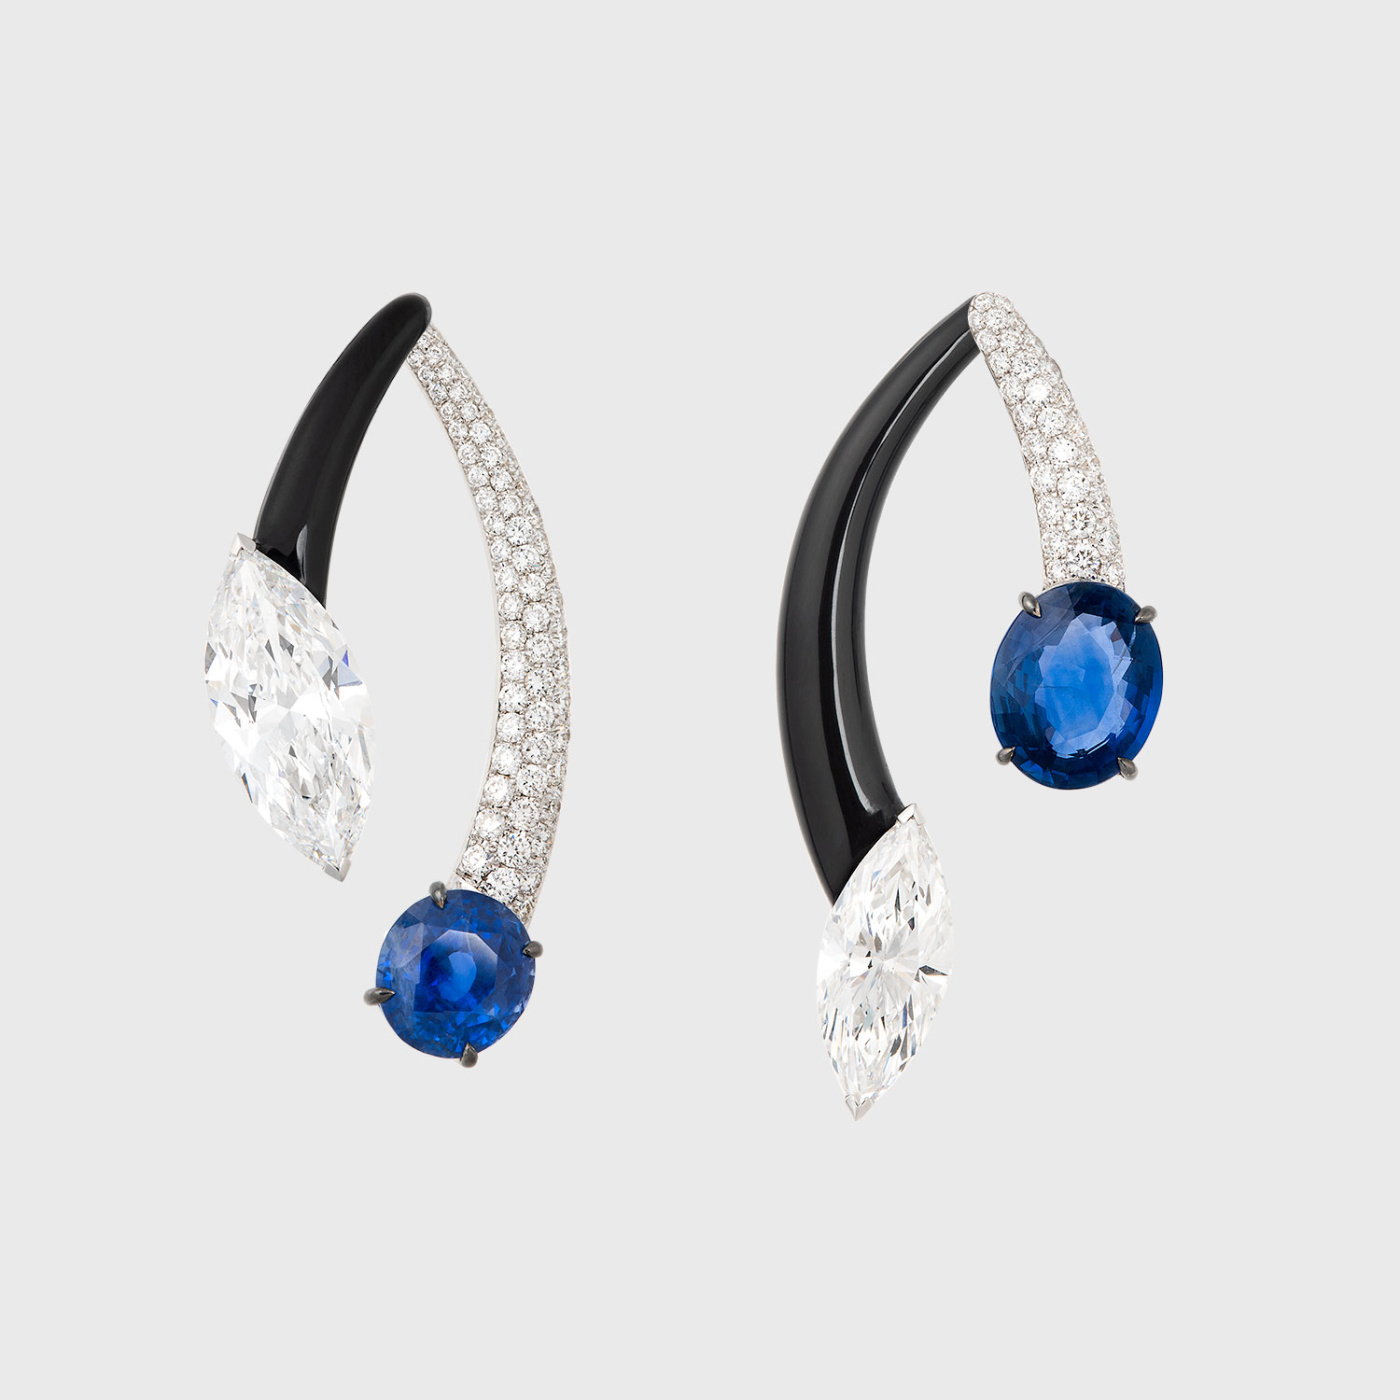 White gold mismatched jacket earrings with marquise white diamonds, round blue sapphires and black enamel